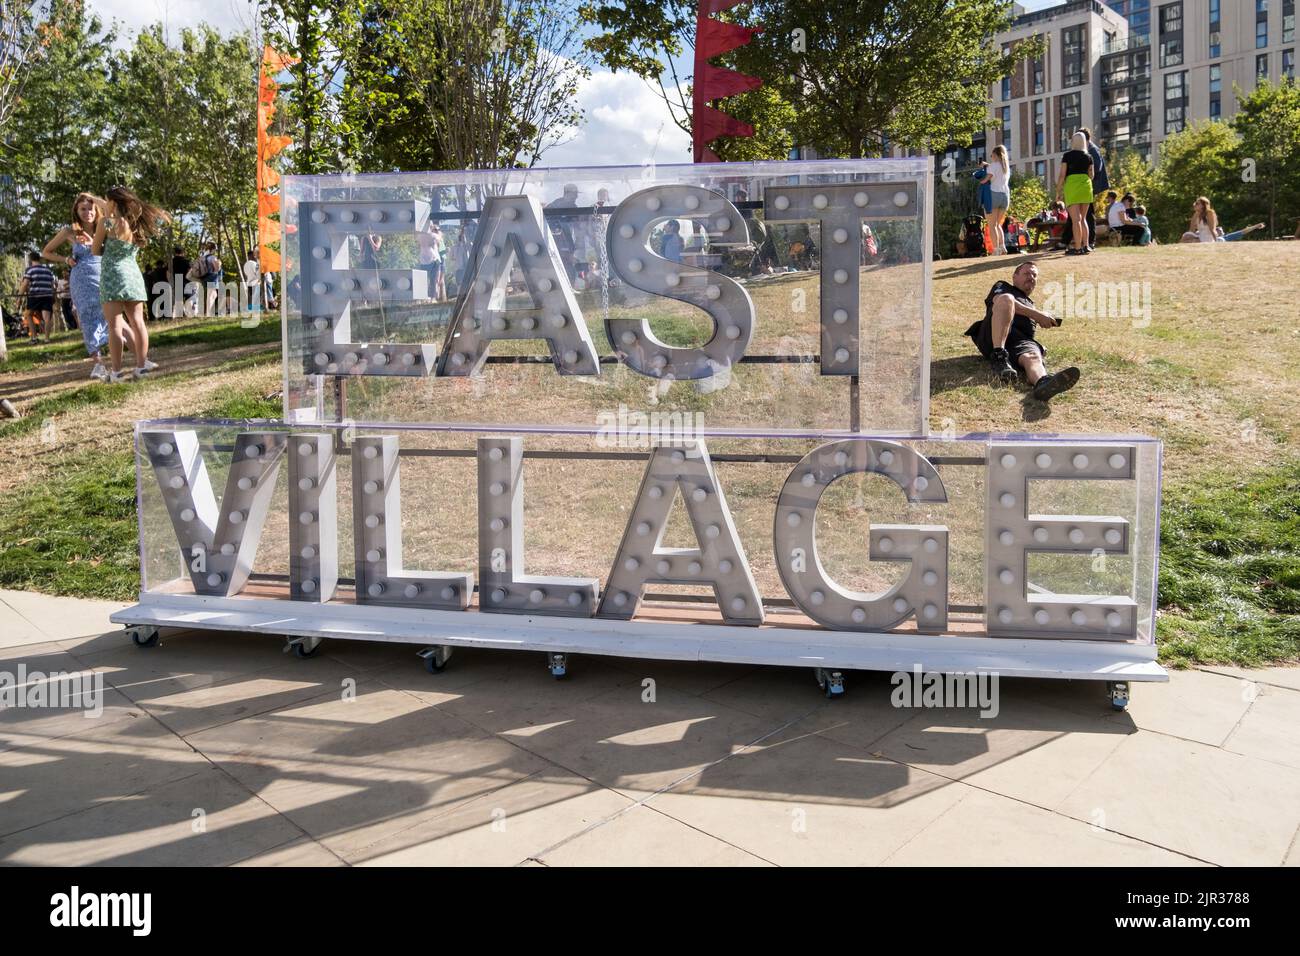 East Village Sign (London) in the park during the E20 Summer Fete celebrating the 10 year anniversary marking the London 2012 Olympics. Stock Photo